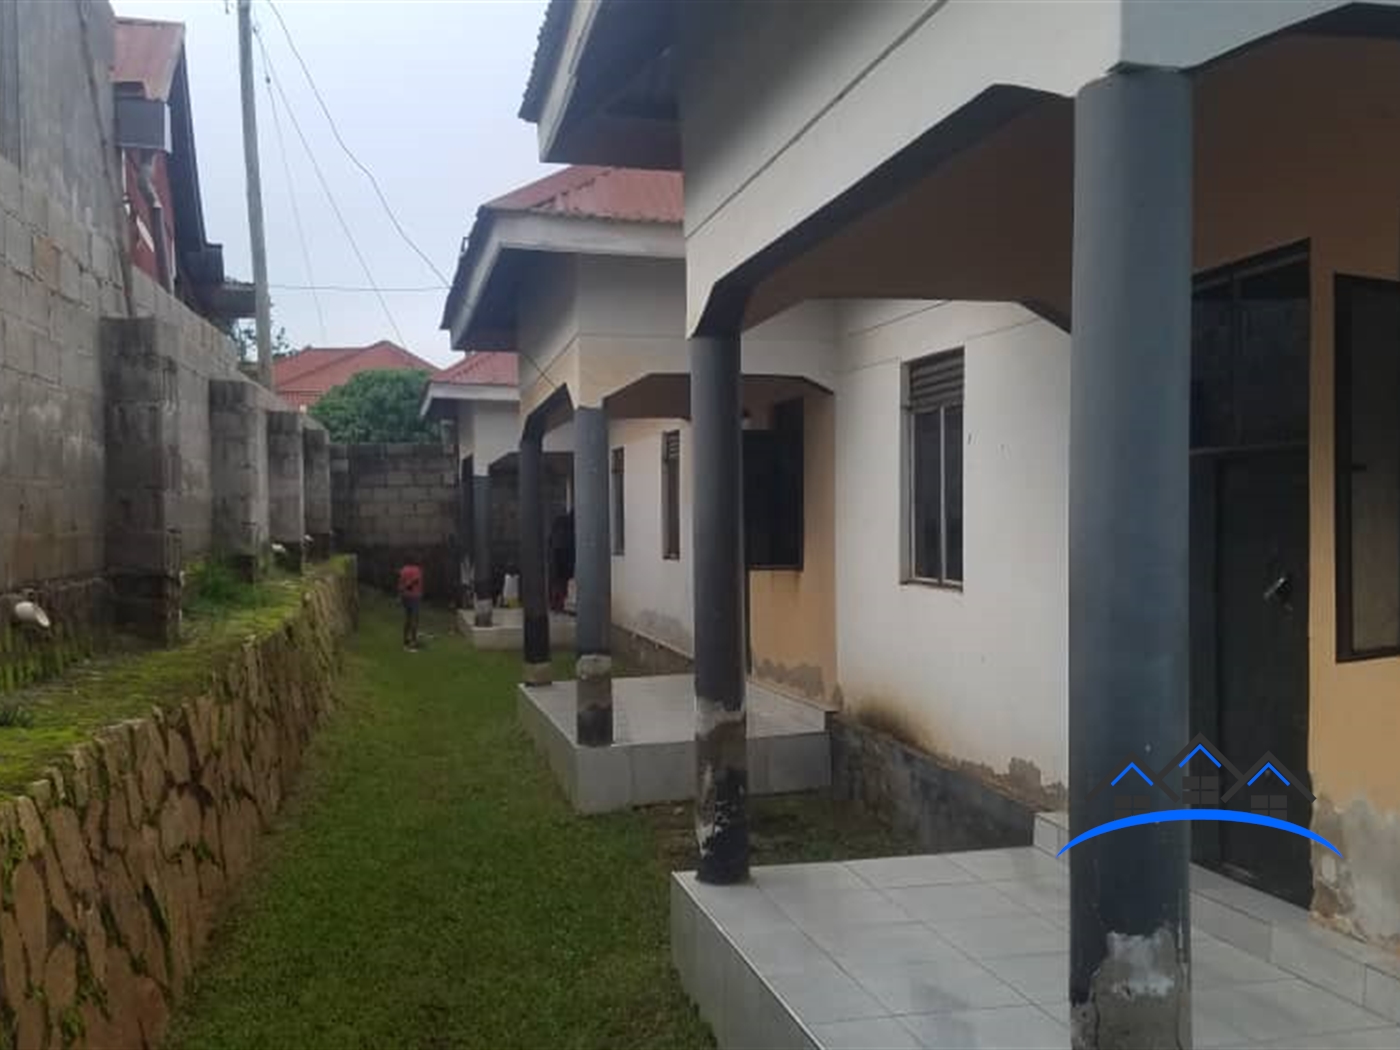 Rental units for sale in Kito Wakiso